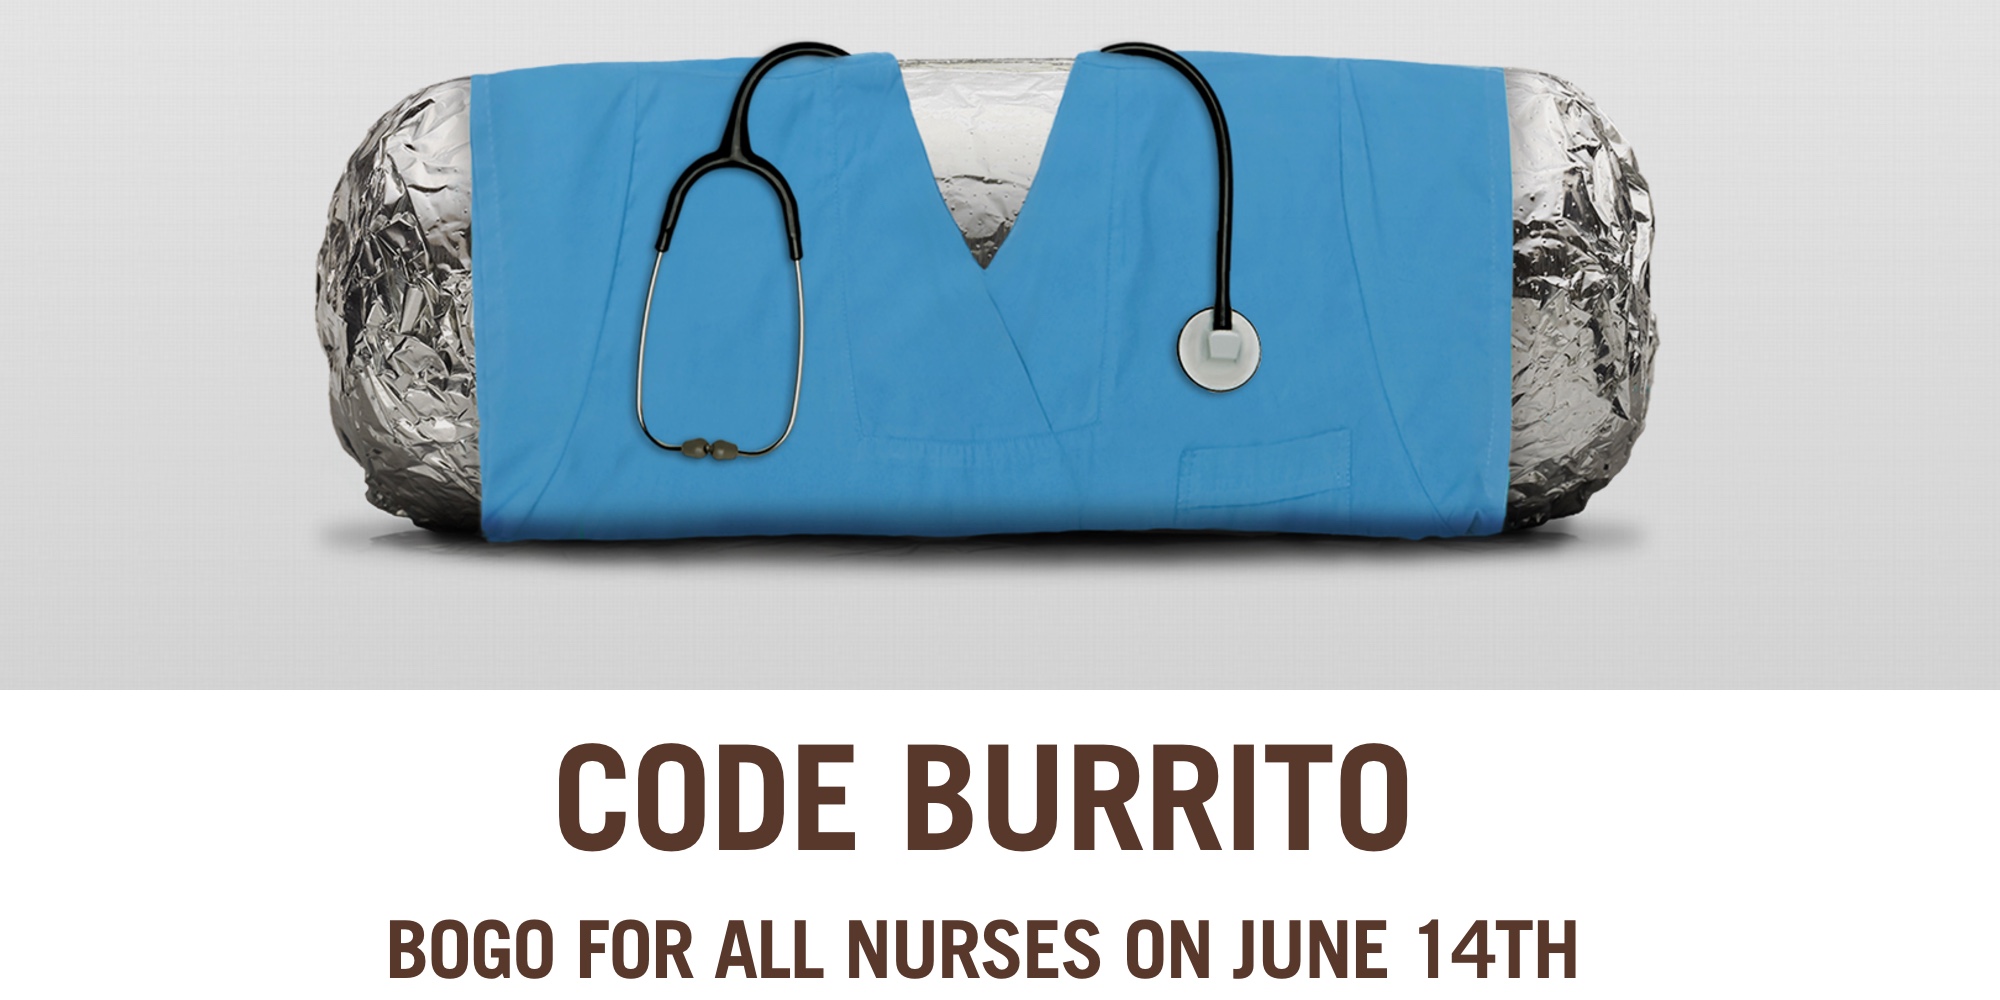 Chipotle offers BOGO free meals for nurses, today only 9to5Toys